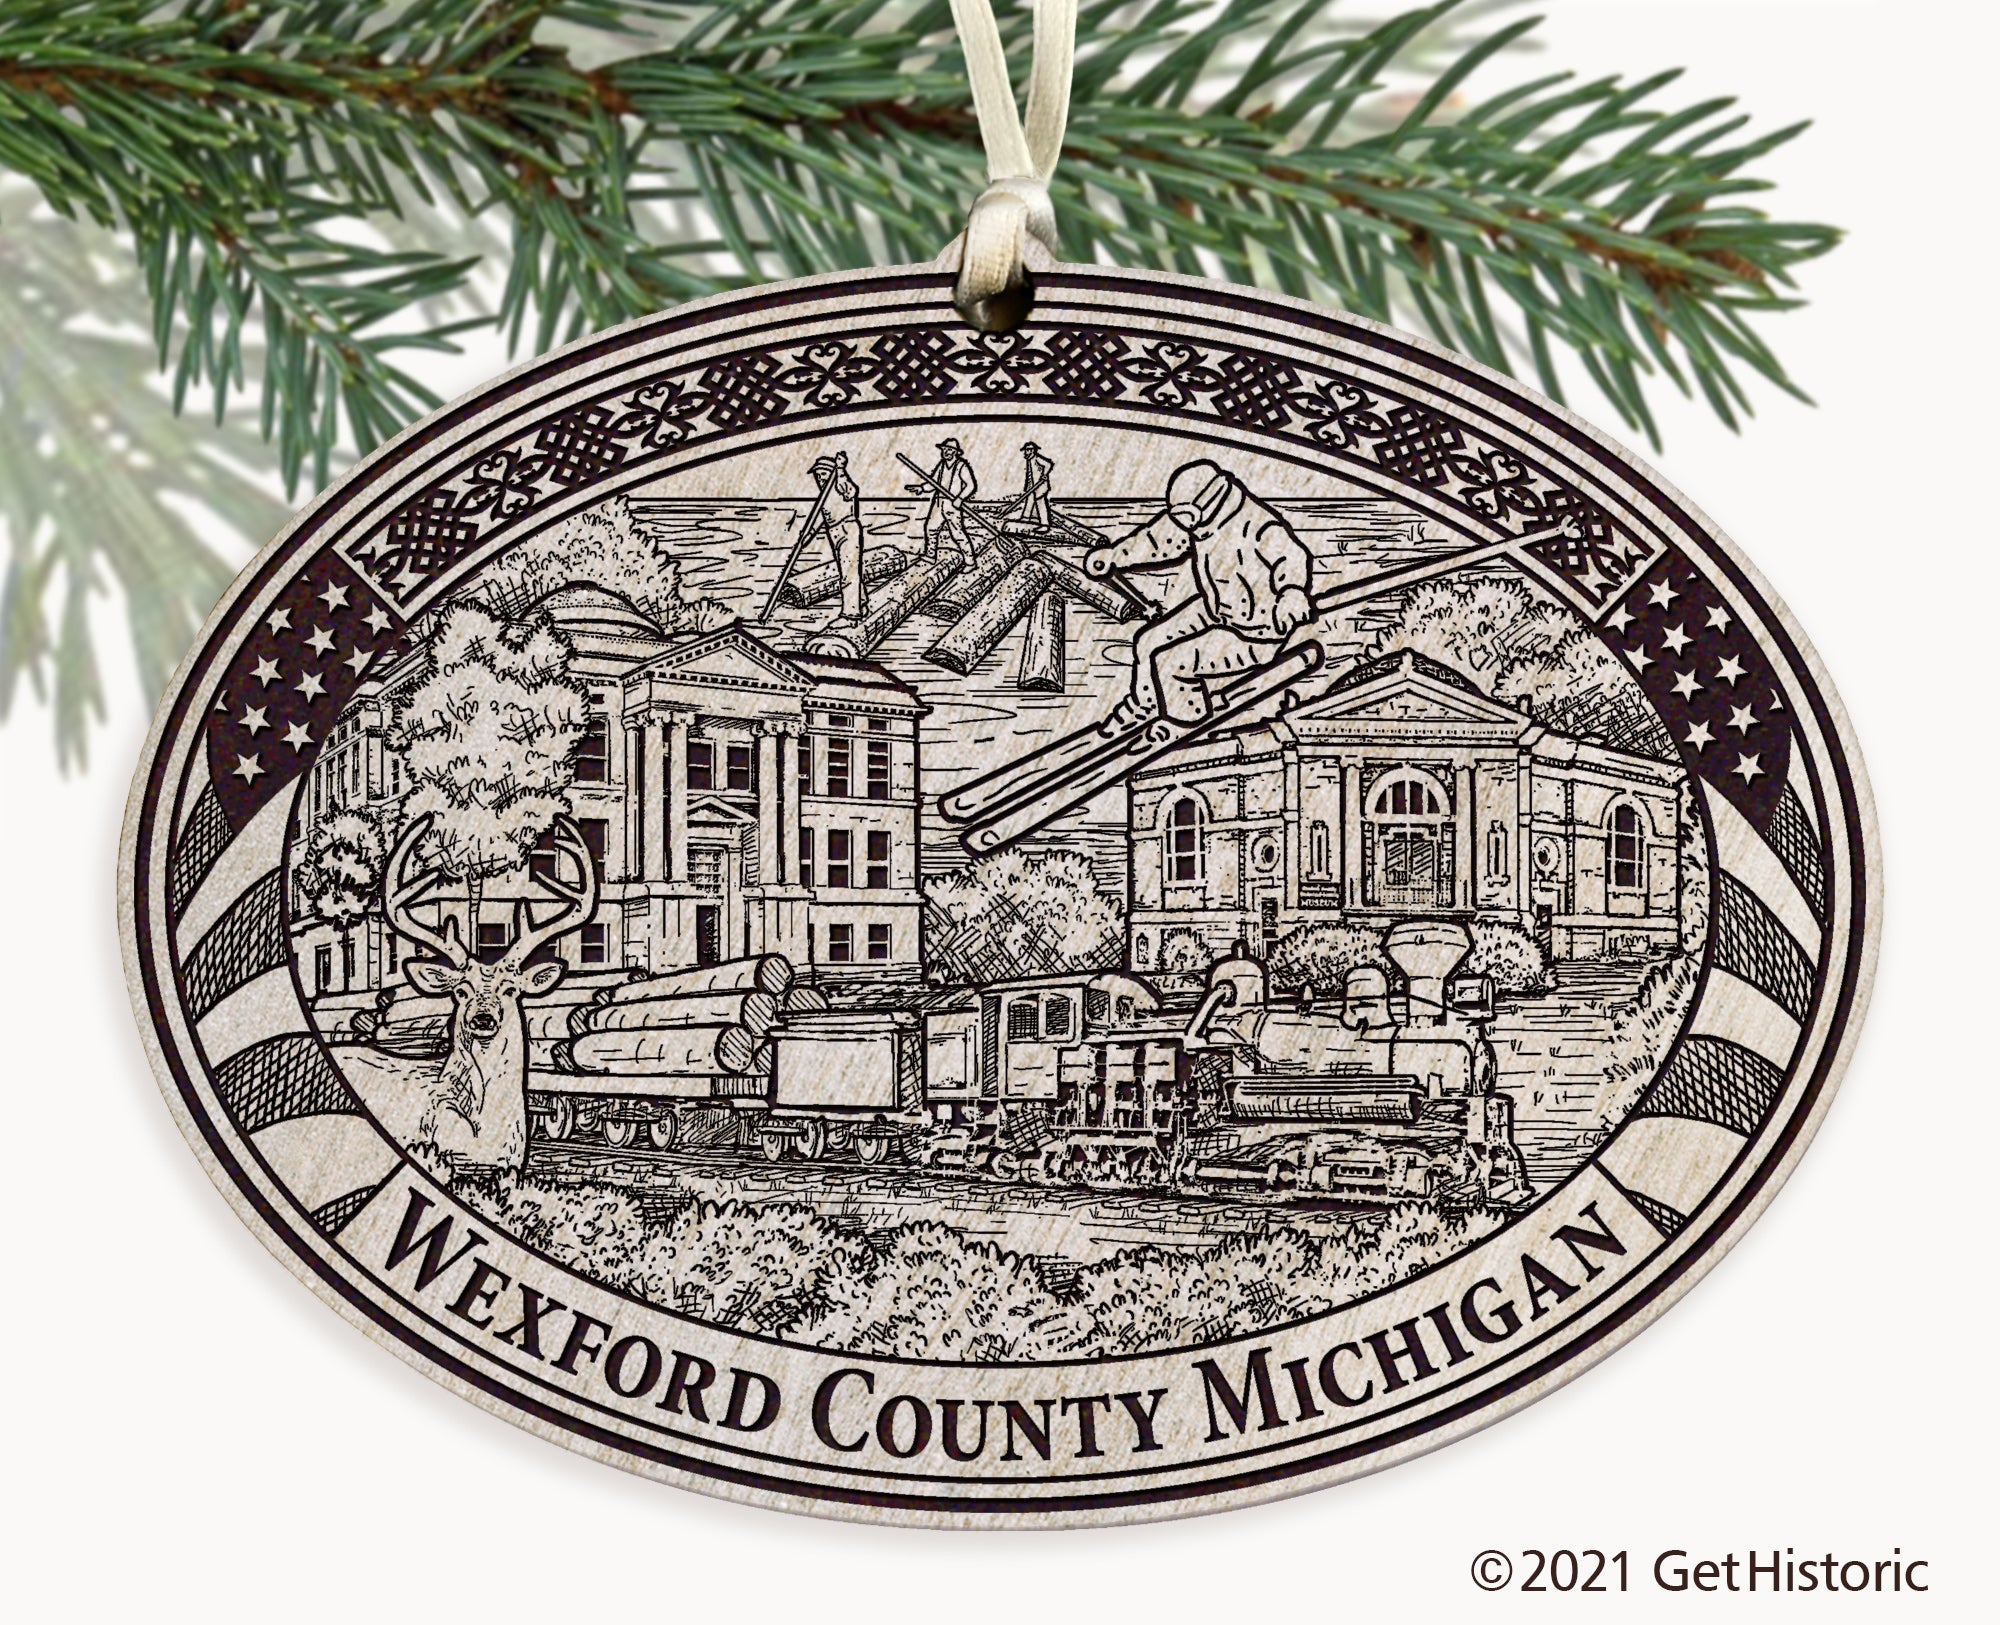 Wexford County Michigan Engraved Ornament